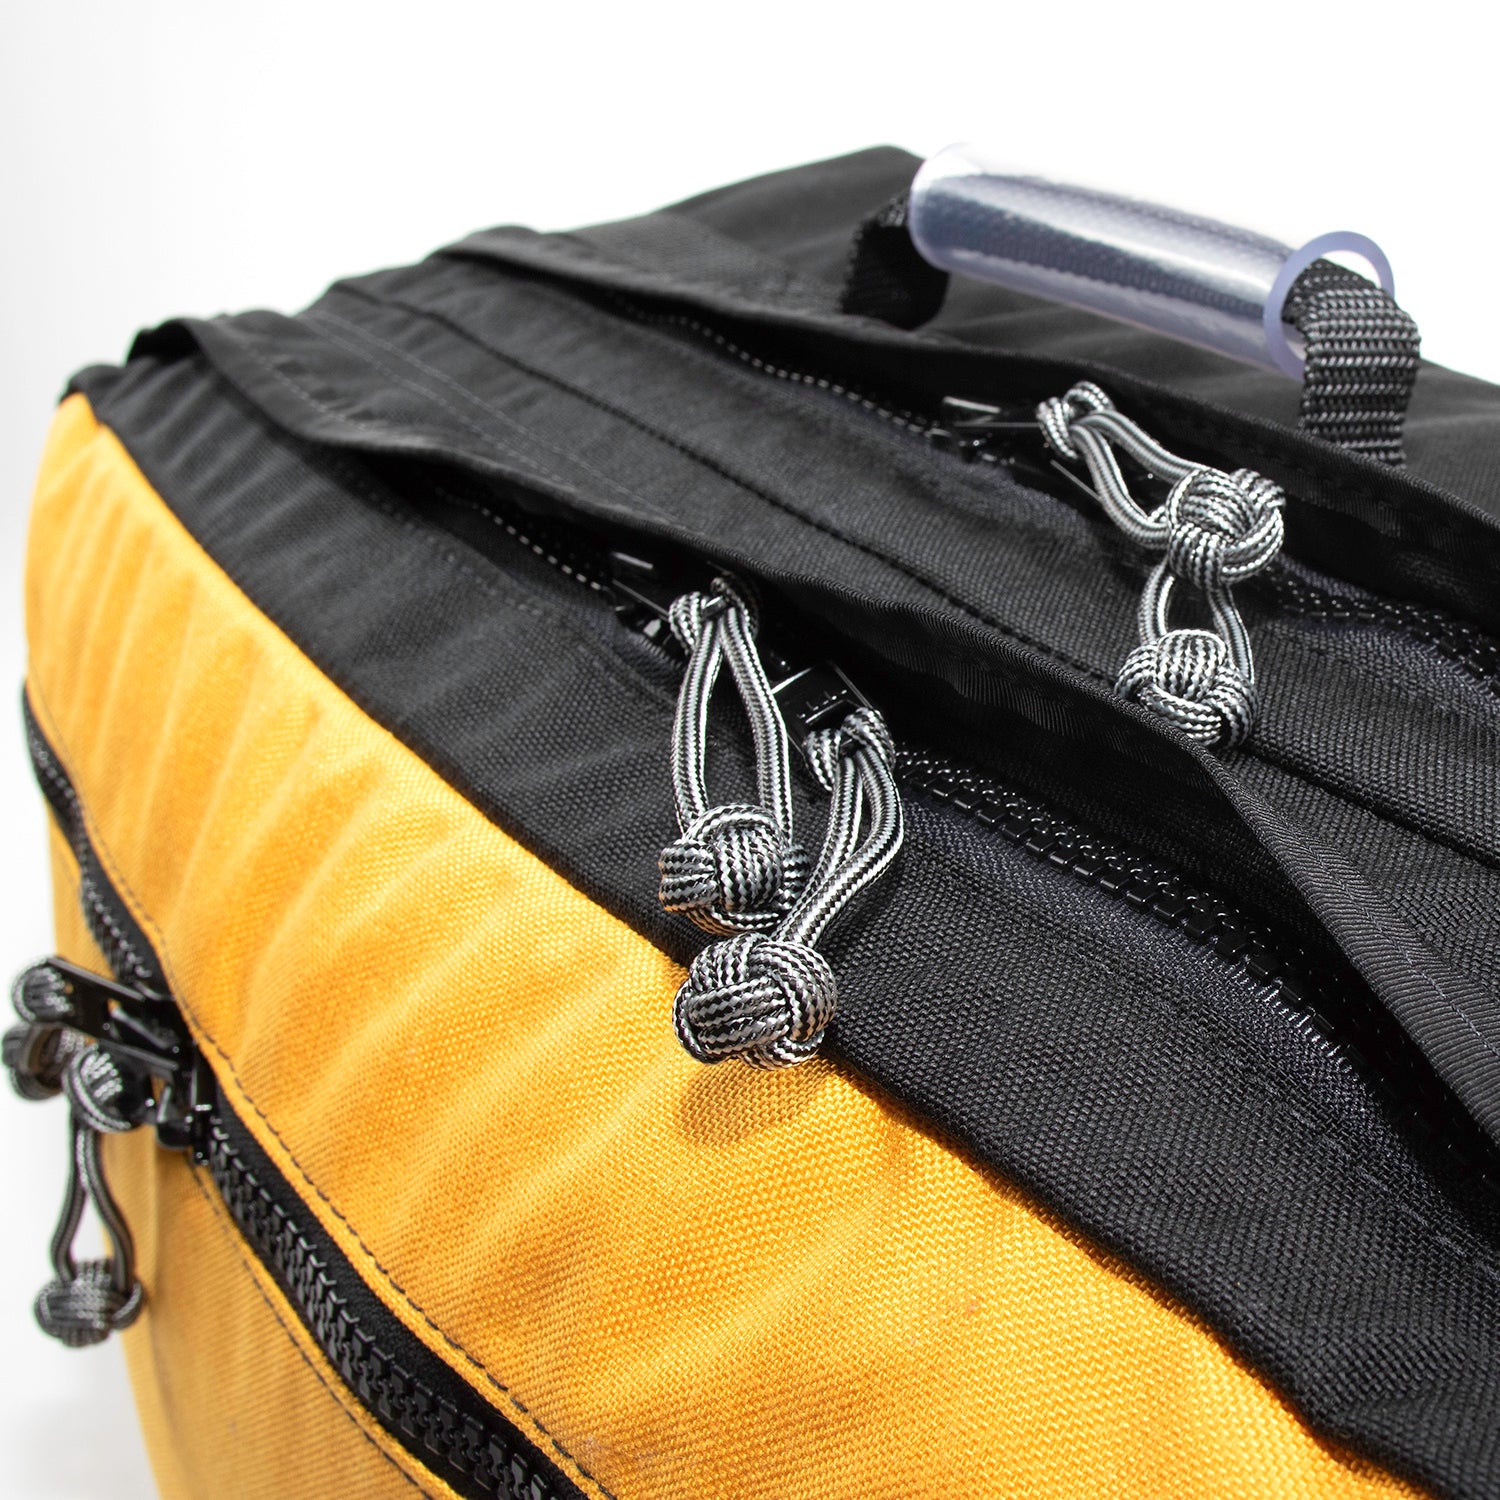 Storm flaps cover the #10 YKK zippers